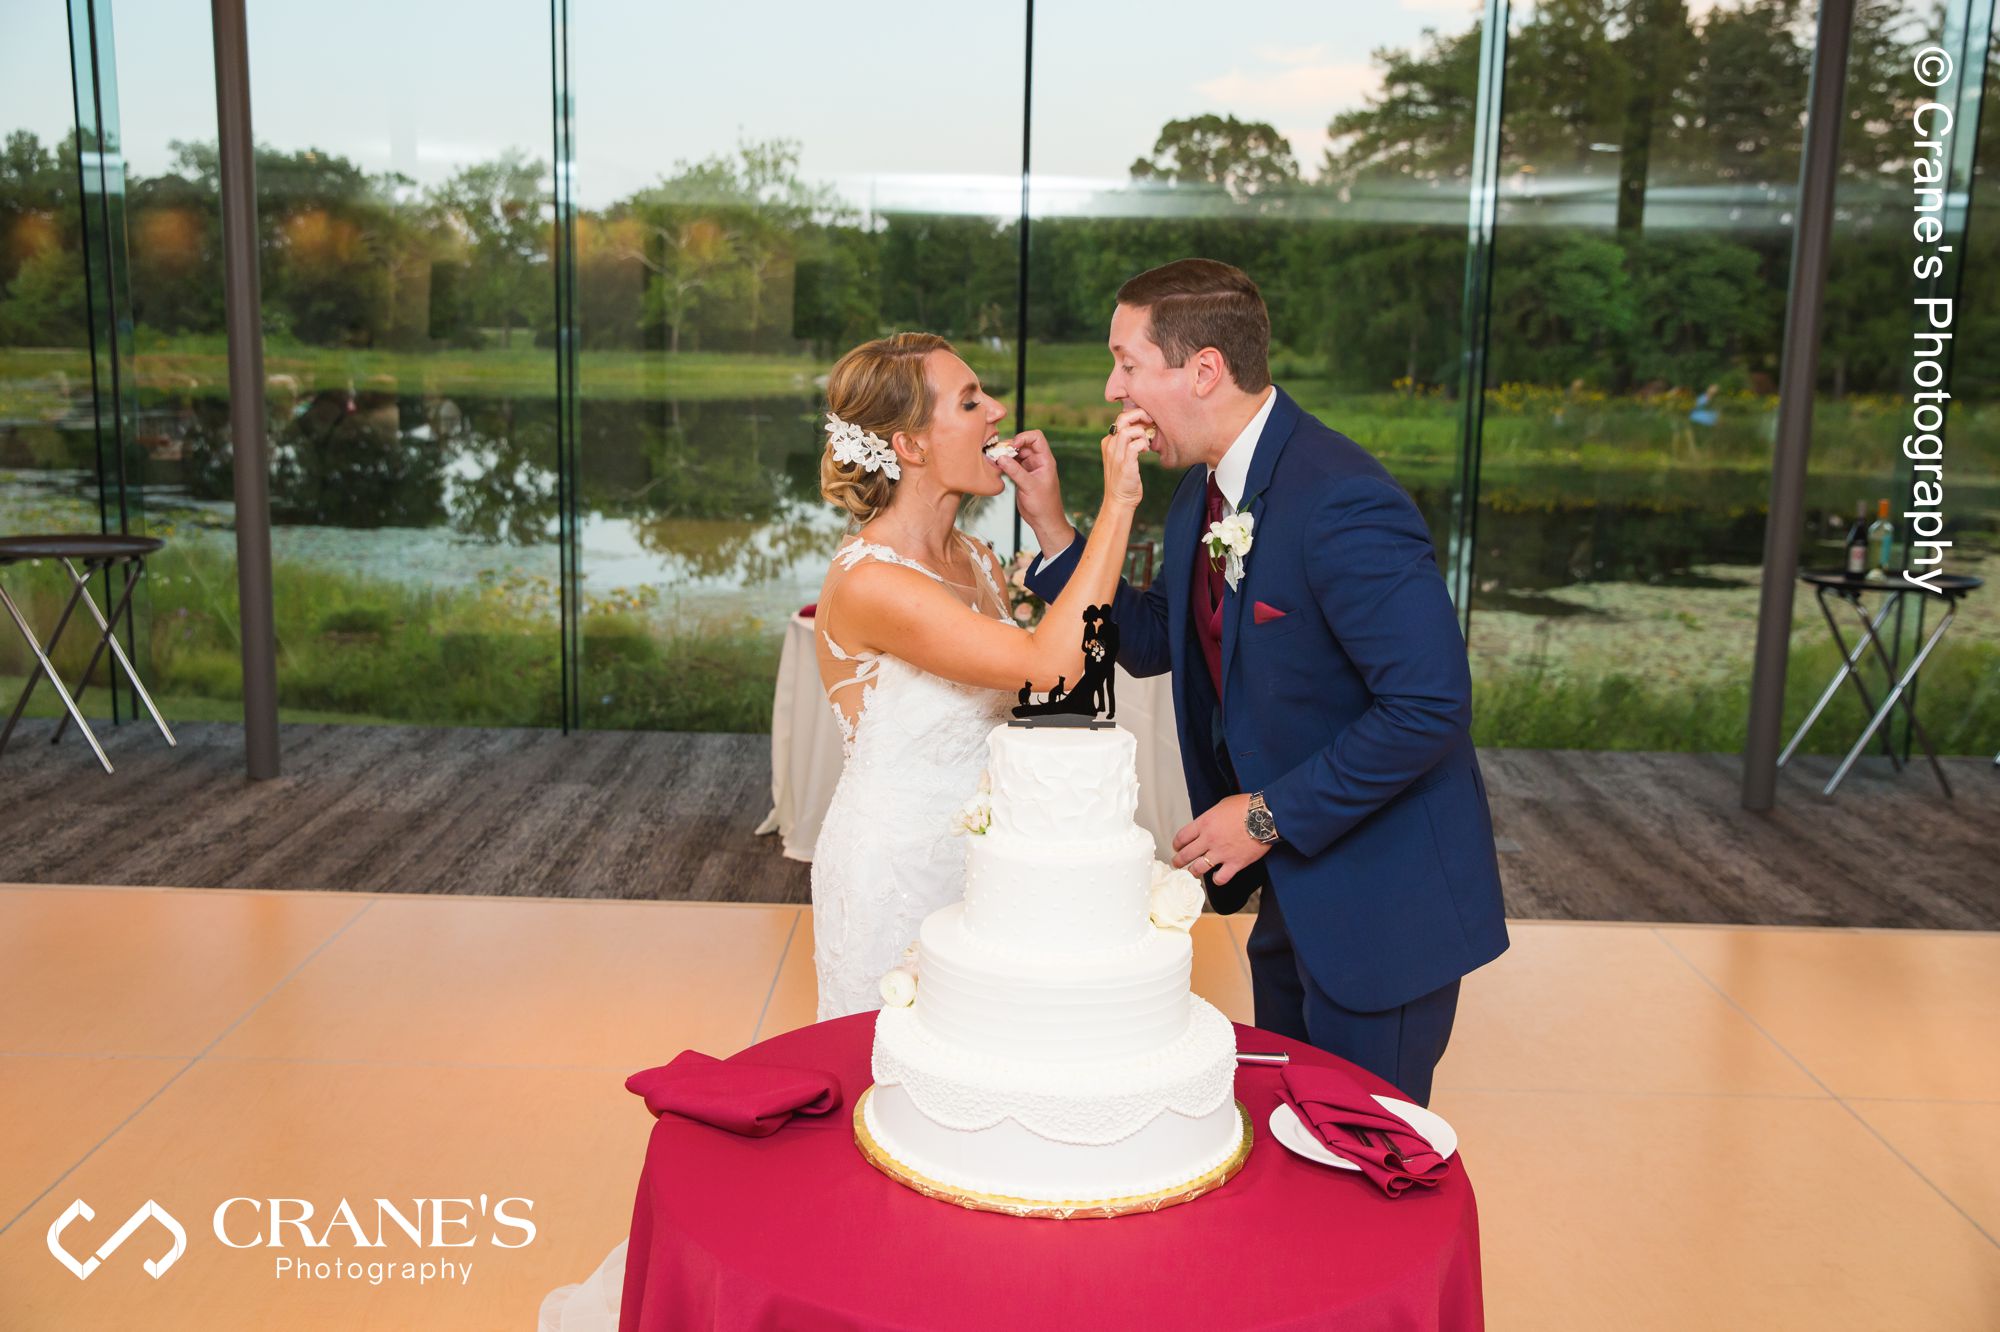 Bride and groom cutting a wedding cake at Ginkgo Room at the Morton Arboretum with Lake Meadow in the background